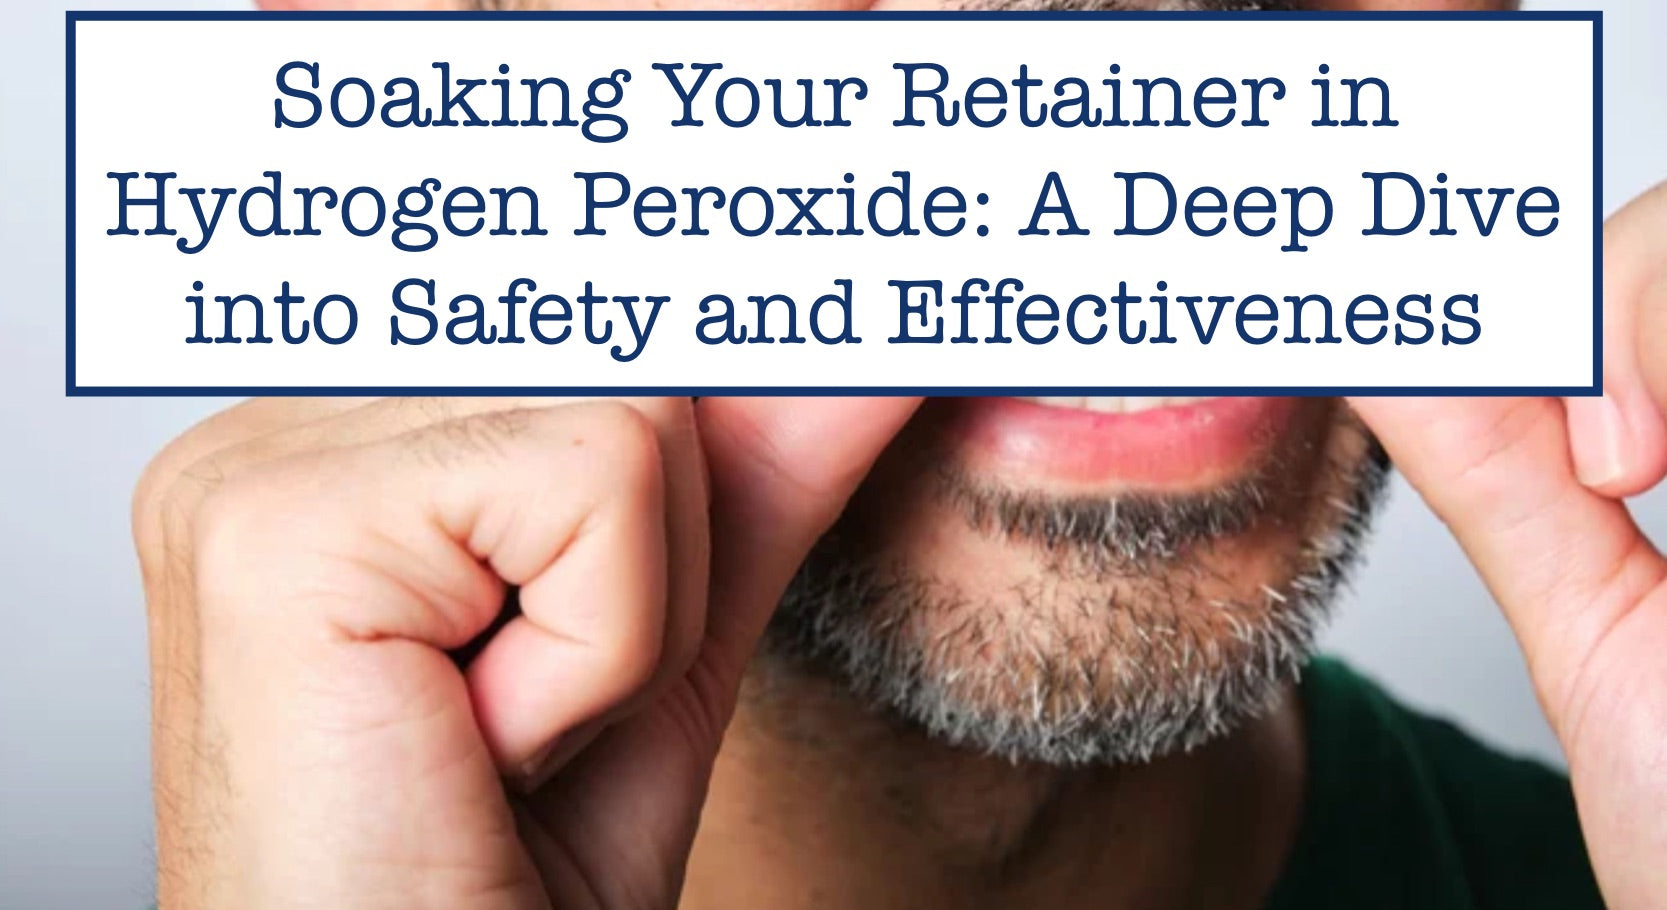 Soaking Your Retainer in Hydrogen Peroxide: A Deep Dive into Safety and Effectiveness